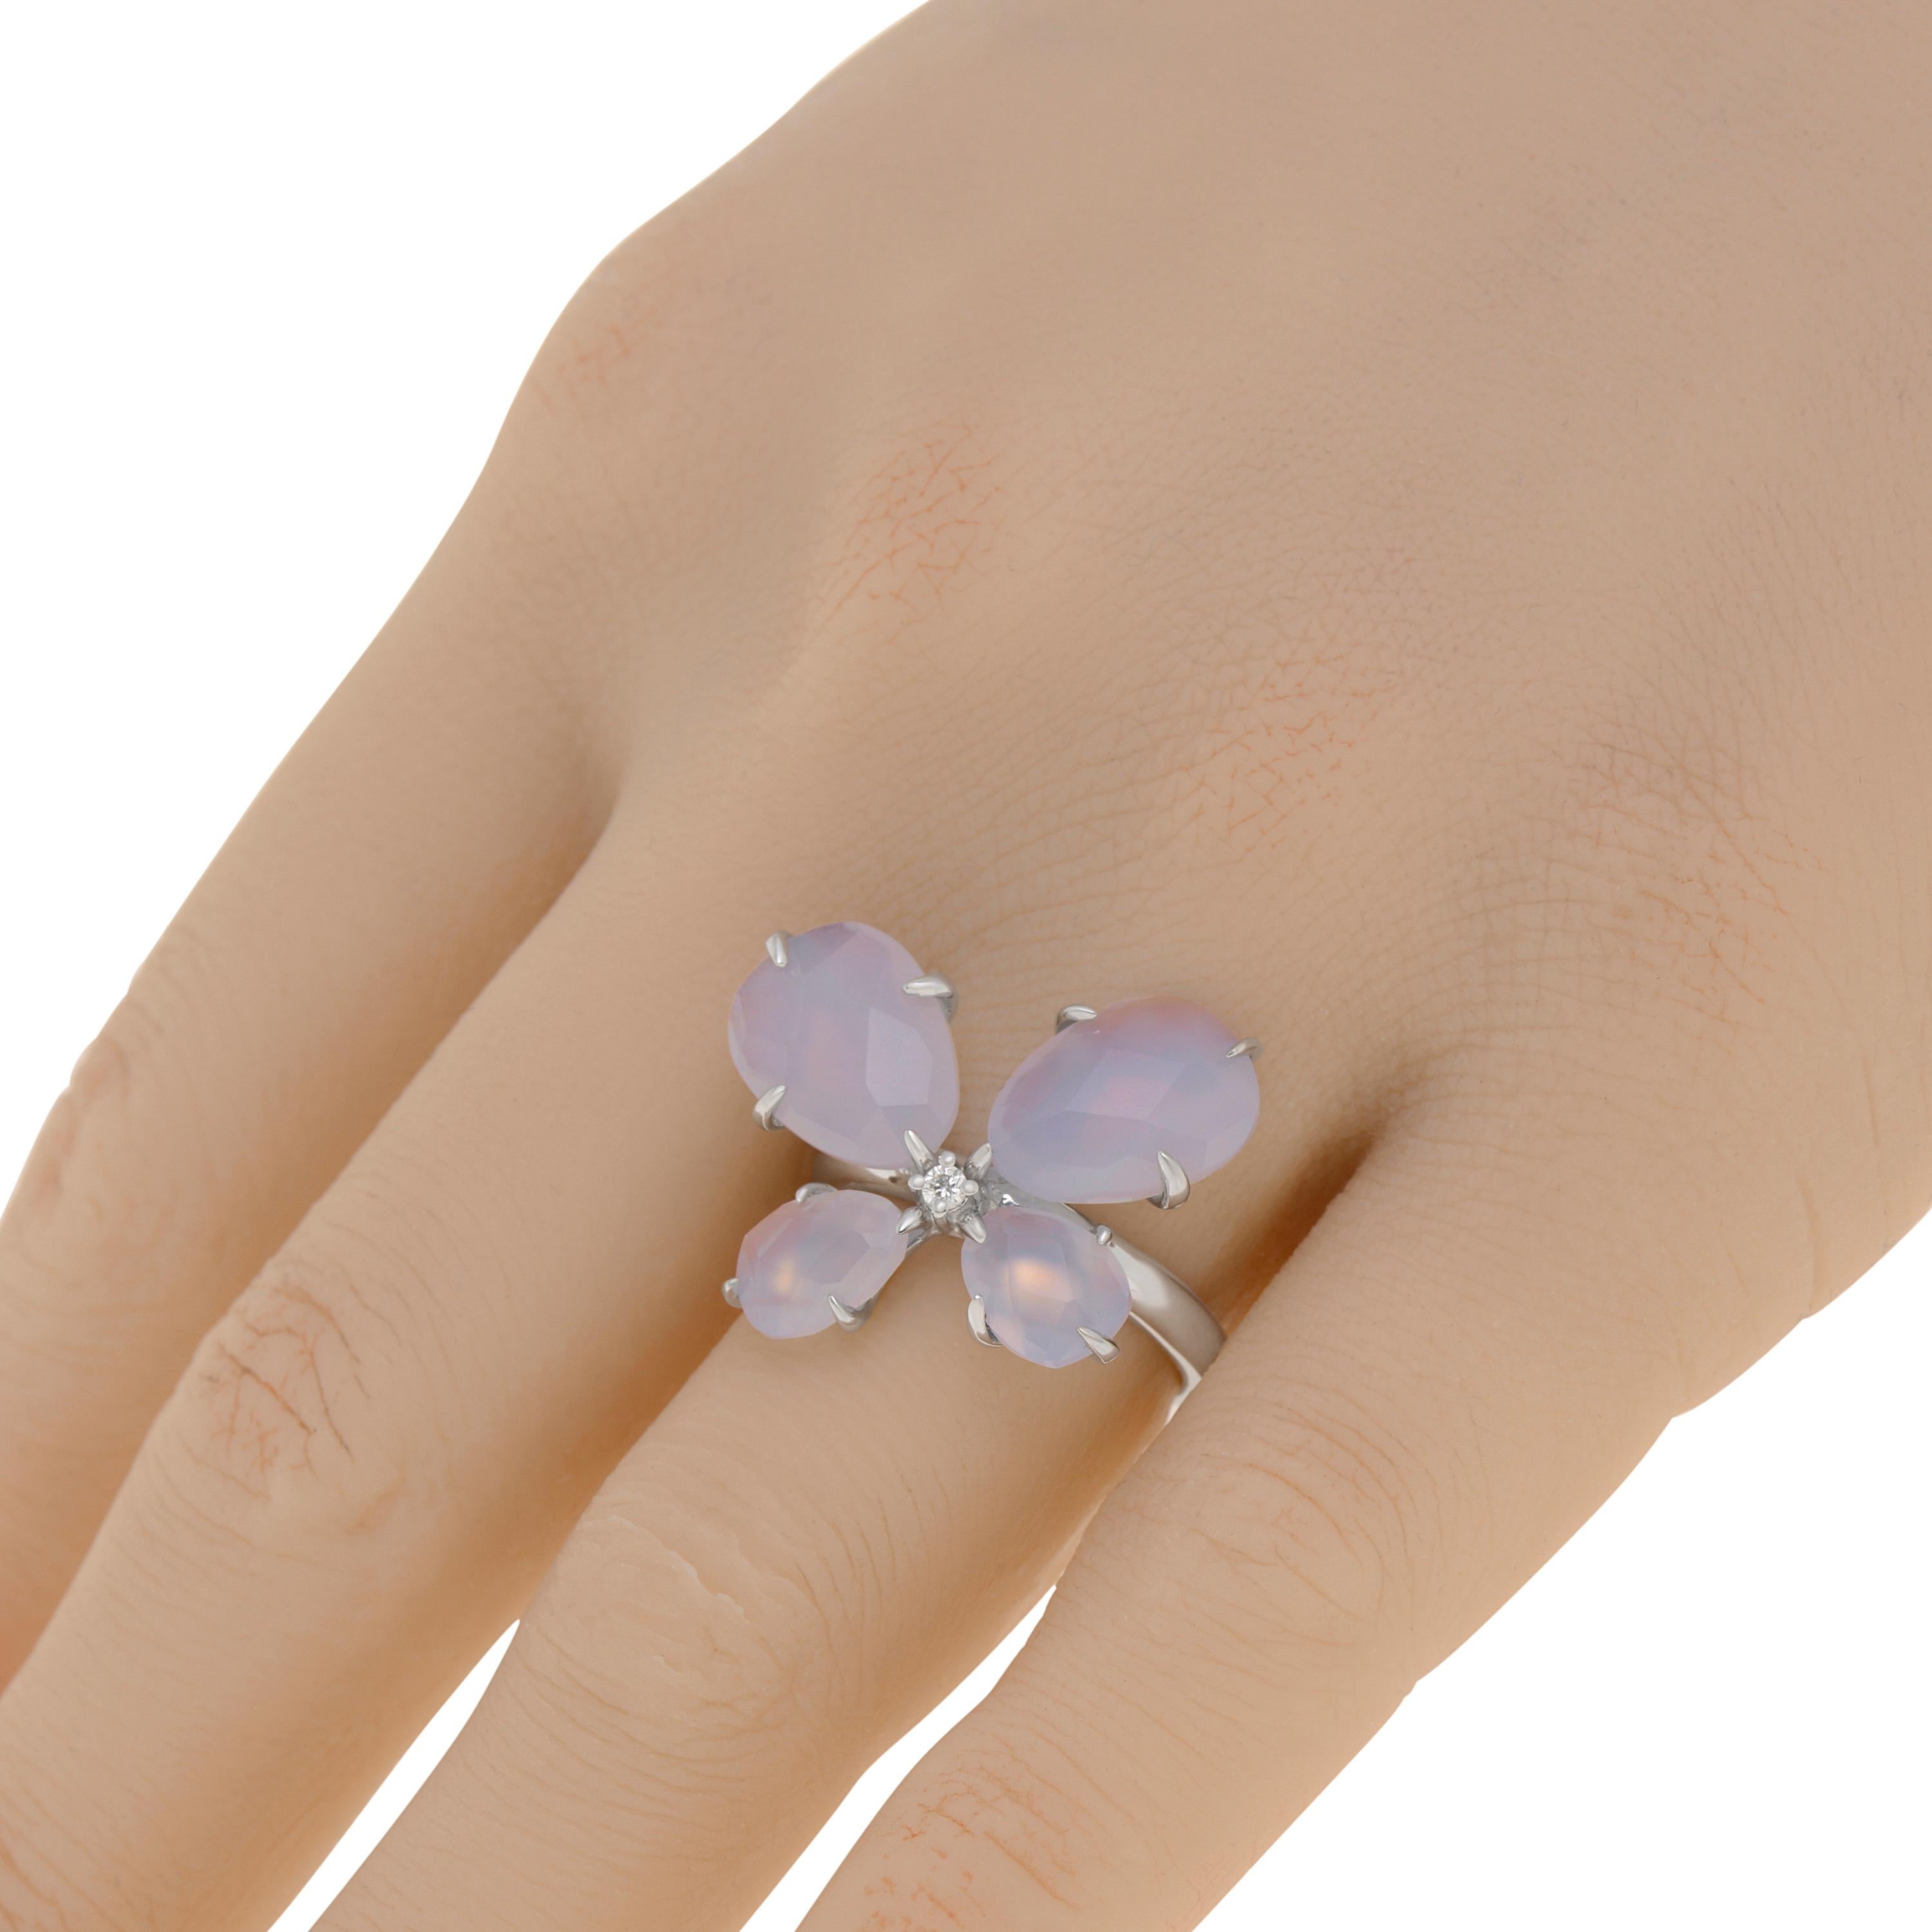 Mimi Milano 18K white gold statement ring features an adorable butterfly design with 0.04ct. tw. diamonds and chalcedony stones. The ring size is 7 (55). The decoration size is 7/8